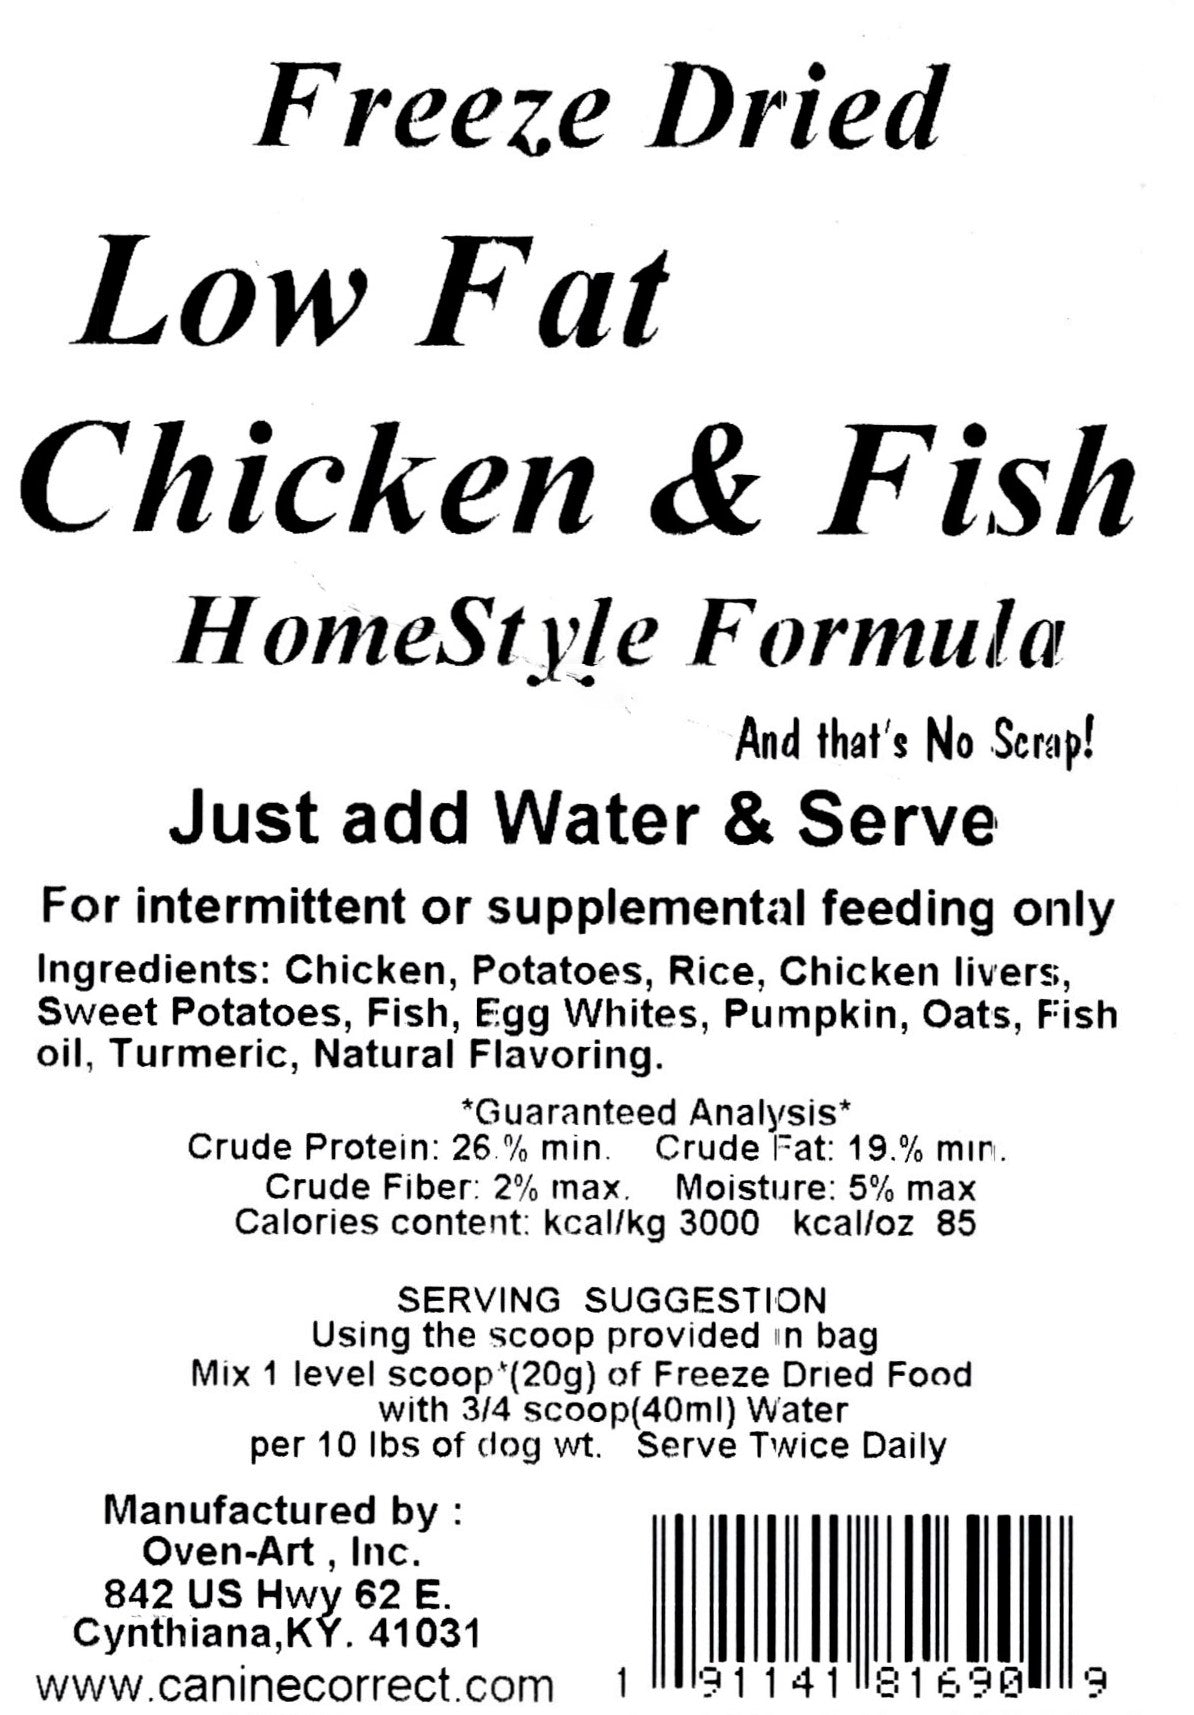 Canine Correct Low Fat Chicken & Fish Home-Style Formula